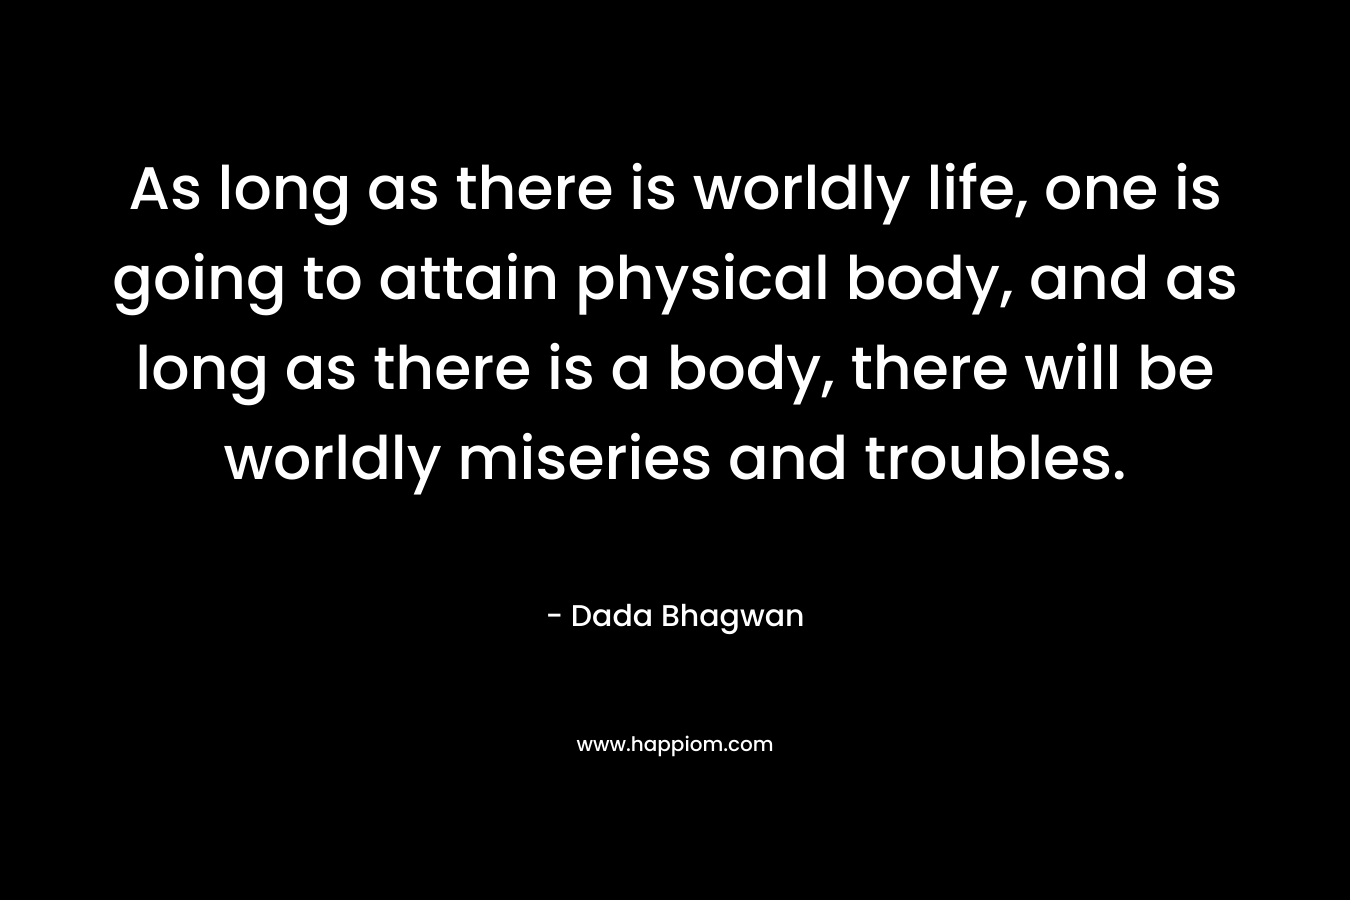 As long as there is worldly life, one is going to attain physical body, and as long as there is a body, there will be worldly miseries and troubles.